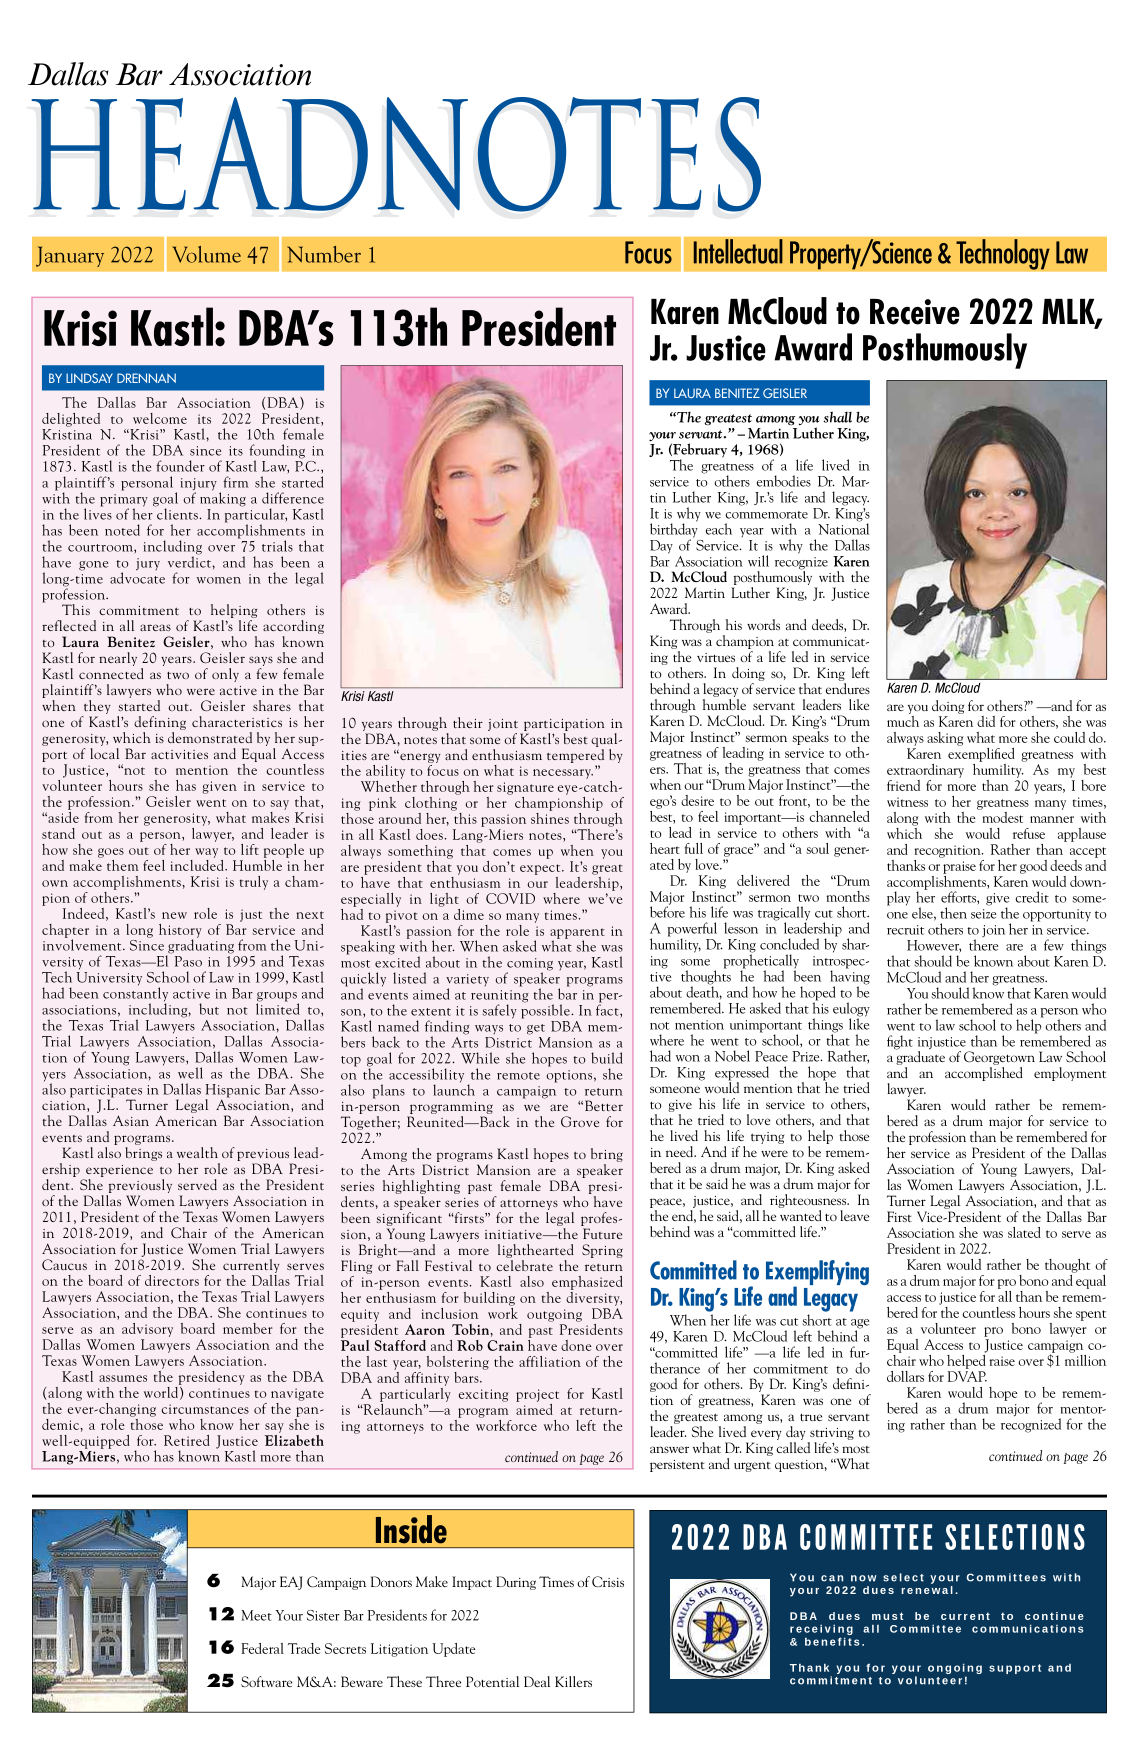 handle is hein.barjournals/hdba0047 and id is 1 raw text is: Dallas Bar Association
HE111111S

January 2022

Volume 47 Number 1

Focus Intellectual Property/Science & Technology Law

Krisi Kasi: DBA's 113th President         Karen McCloud to Receive 2022 MLK,
Jr. Justice Award Posthumously

BY LINDSAY DRENNAN
The Dallas Bar Association (DBA) is
delighted to welcome its 2022 President,
Kristina N. Krisi Kastl, the 10th female
President of the DBA since its founding in
1873. Kastl is the founder of Kastl Law, P.C.,
a plaintiff's personal injury firm she started
with the primary goal of making a difference
in the lives of her clients. In particular, Kastl
has been noted for her accomplishments in
the courtroom, including over 75 trials that
have gone to jury verdict, and has been a
long-time advocate for women in the legal
profession.
This commitment to helping others is
reflected in all areas of Kastl's life according
to Laura Benitez Geisler, who has known
Kastl for nearly 20 years. Geisler says she and
Kastl connected as two of only a few female
plaintiff's lawyers who were active in the Bar
when they started out. Geisler shares that
one of Kastl's defining characteristics is her
generosity, which is demonstrated by her sup-
port of local Bar activities and Equal Access
to Justice, not to mention the countless
volunteer hours she has given in service to
the profession. Geisler went on to say that,
aside from her generosity, what makes Krisi
stand out as a person, lawyer, and leader is
how she goes out of her way to lift people up
and make them feel included. Humble in her
own accomplishments, Krisi is truly a cham-
pion of others.
Indeed, Kastl's new role is just the next
chapter in a long history of Bar service and
involvement. Since graduating from the Uni-
versity of Texas-El Paso in 1995 and Texas
Tech University School of Law in 1999, Kastl
had been constantly active in Bar groups and
associations, including, but not limited to,
the Texas Trial Lawyers Association, Dallas
Trial Lawyers Association, Dallas Associa-
tion of Young Lawyers, Dallas Women Law-
yers Association, as well as the DBA. She
also participates in Dallas Hispanic Bar Asso-
ciation, J.L. Turner Legal Association, and
the Dallas Asian American Bar Association
events and programs.
Kastl also brings a wealth of previous lead-
ership experience to her role as DBA Presi-
dent. She previously served as the President
of the Dallas Women Lawyers Association in
2011, President of the Texas Women Lawyers
in 2018-2019, and Chair of the American
Association for Justice Women Trial Lawyers
Caucus in 2018-2019. She currently serves
on the board of directors for the Dallas Trial
Lawyers Association, the Texas Trial Lawyers
Association, and the DBA. She continues to
serve as an advisory board member for the
Dallas Women Lawyers Association and the
Texas Women Lawyers Association.
Kastl assumes the presidency as the DBA
(along with the world) continues to navigate
the ever-changing circumstances of the pan-
demic, a role those who know her say she is
well-equipped for. Retired Justice Elizabeth
Lang-Miers, who has known Kastl more than

/a
3     .k

Krisi Kasti
10 years through their joint participation in
the DBA, notes that some of Kastl's best qual-
ities are energy and enthusiasm tempered by
the ability to focus on what is necessary.
Whether through her signature eye-catch-
ing pink clothing or her championship of
those around her, this passion shines through
in all Kastl does. Lang-Miers notes, There's
always something that comes up when you
are president that you don't expect. It's great
to have that enthusiasm in our leadership,
especially in light of COVID where we've
had to pivot on a dime so many times.
Kastl's passion for the role is apparent in
speaking with her. When asked what she was
most excited about in the coming year, Kastl
quickly listed a variety of speaker programs
and events aimed at reuniting the bar in per-
son, to the extent it is safely possible. In fact,
Kastl named finding ways to get DBA mem-
bers back to the Arts District Mansion as a
top goal for 2022. While she hopes to build
on the accessibility the remote options, she
also plans to launch a campaign to return
in-person programming as we are Better
Together; Reunited-Back in the Grove for
2022.
Among the programs Kastl hopes to bring
to the Arts District Mansion are a speaker
series highlighting past female DBA presi-
dents, a speaker series of attorneys who have
been significant firsts for the legal profes-
sion, a Young Lawyers initiative-the Future
is Bright-and a more lighthearted Spring
Fling or Fall Festival to celebrate the return
of in-person events. Kastl also emphasized
her enthusiasm for building on the diversity,
equity and inclusion work outgoing DBA
president Aaron Tobin, and past Presidents
Paul Stafford and Rob Crain have done over
the last year, bolstering the affiliation of the
DBA and affinity bars.
A particularly exciting project for Kastl
is Relaunch-a program aimed at return-
ing attorneys to the workforce who left the
continued on page 26

BY LAURA BENITEZ GEISLER
The greatest among you shall be
your servant. - Martin Luther King,
Jr. (February 4, 1968)
The greatness of a life lived in
service to others embodies Dr. Mar-
tin Luther King, Jr.'s life and legacy.
It is why we commemorate Dr. King's
birthday each year with a National
Day of Service. It is why the Dallas
Bar Association will recognize Karen
D. McCloud posthumously with the
2022 Martin Luther King, Jr. Justice
Award.
Through his words and deeds, Dr.
King was a champion at communicat-
ing the virtues of a life led in service
to others. In doing so, Dr. King left
behind a legacy of service that endures
through humble servant leaders like
Karen D. McCloud. Dr. King's Drum
Major Instinct sermon speaks to the
greatness of leading in service to oth-
ers. That is, the greatness that comes
when our Drum Major Instinct-the
ego's desire to be out front, to be the
best, to feel important-is channeled
to lead in service to others with a
heart full of grace and a soul gener-
ated by love.
Dr. King delivered the Drum
Major Instinct sermon two months
before his life was tragically cut short.
A powerful lesson in leadership and
humility, Dr. King concluded by shar-
ing  some  prophetically introspec-
tive thoughts he had been having
about death, and how he hoped to be
remembered. He asked that his eulogy
not mention unimportant things like
where he went to school, or that he
had won a Nobel Peace Prize. Rather,
Dr. King expressed the hope that
someone would mention that he tried
to give his life in service to others,
that he tried to love others, and that
he lived his life trying to help those
in need. And if he were to be remem-
bered as a drum major, Dr. King asked
that it be said he was a drum major for
peace, justice, and righteousness. In
the end, he said, all he wanted to leave
behind was a committed life.
Committed to Exemplifying
Dr. King's Life and Legacy
When her life was cut short at age
49, Karen D. McCloud left behind a
committed life -a life led in fur-
therance of her commitment to do
good for others. By Dr. King's defini-
tion of greatness, Karen was one of
the greatest among us, a true servant
leader. She lived every day striving to
answer what Dr. King called life's most
persistent and urgent question, What

4F 1 r
Karen D. McCloud
are you doing for others? -and for as
much as Karen did for others, she was
always asking what more she could do.
Karen exemplified greatness with
extraordinary humility. As my best
friend for more than 20 years, I bore
witness to her greatness many times,
along with the modest manner with
which she would refuse applause
and recognition. Rather than accept
thanks or praise for her good deeds and
accomplishments, Karen would down-
play her efforts, give credit to some-
one else, then seize the opportunity to
recruit others to join her in service.
However, there are a few things
that should be known about Karen D.
McCloud and her greatness.
You should know that Karen would
rather be remembered as a person who
went to law school to help others and
fight injustice than be remembered as
a graduate of Georgetown Law School
and an accomplished employment
lawyer.
Karen would rather be remem-
bered as a drum major for service to
the profession than be remembered for
her service as President of the Dallas
Association of Young Lawyers, Dal-
las Women Lawyers Association, J.L.
Turner Legal Association, and that as
First Vice-President of the Dallas Bar
Association she was slated to serve as
President in 2022.
Karen would rather be thought of
as a drum major for pro bono and equal
access to justice for all than be remem-
bered for the countless hours she spent
as a volunteer pro bono lawyer or
Equal Access to Justice campaign co-
chair who helped raise over $1 million
dollars for DVAP.
Karen would hope to be remem-
bered as a drum maj or for mentor-
ing rather than be recognized for the

continued on page 26

Inside

6    Major EAJ Campaign Donors Make Impact During Times of Crisis
1 2 Meet Your Sister Bar Presidents for 2022

Federal Trade Secrets Litigation Update
Software M&A: Beware These Three Potential Deal Killers

16:
25

Wramma                  n.


